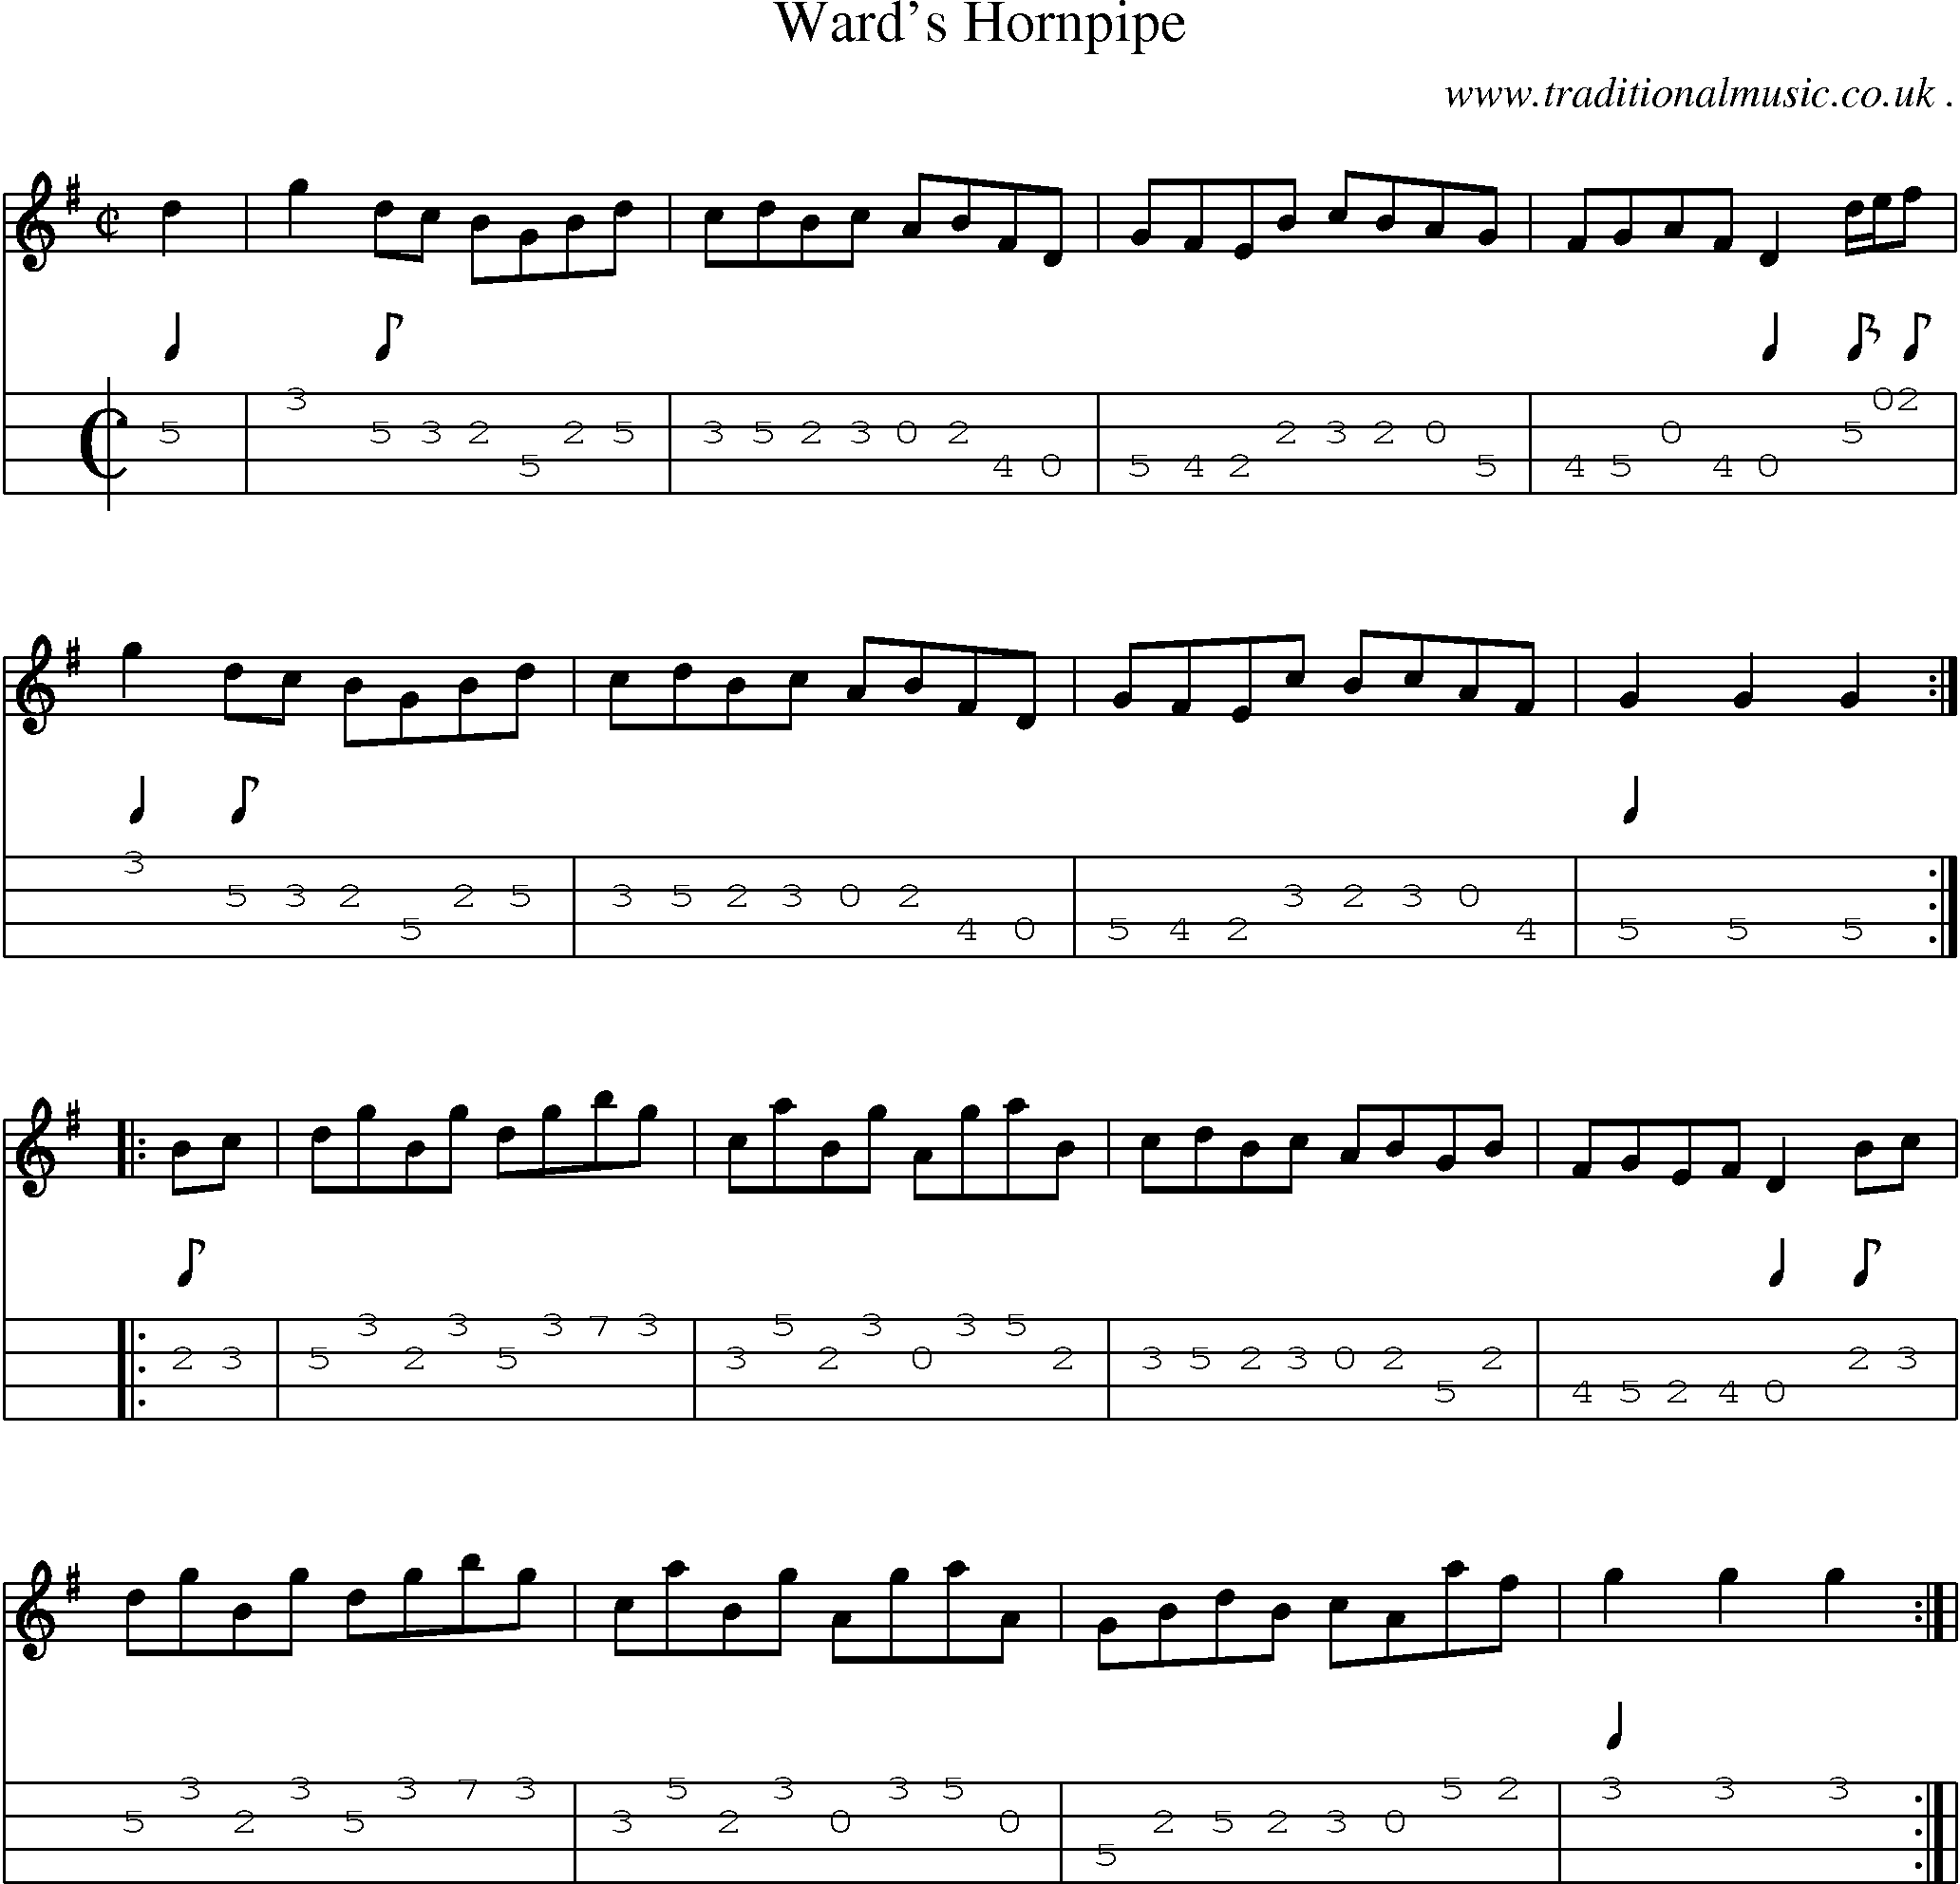 Sheet-Music and Mandolin Tabs for Wards Hornpipe